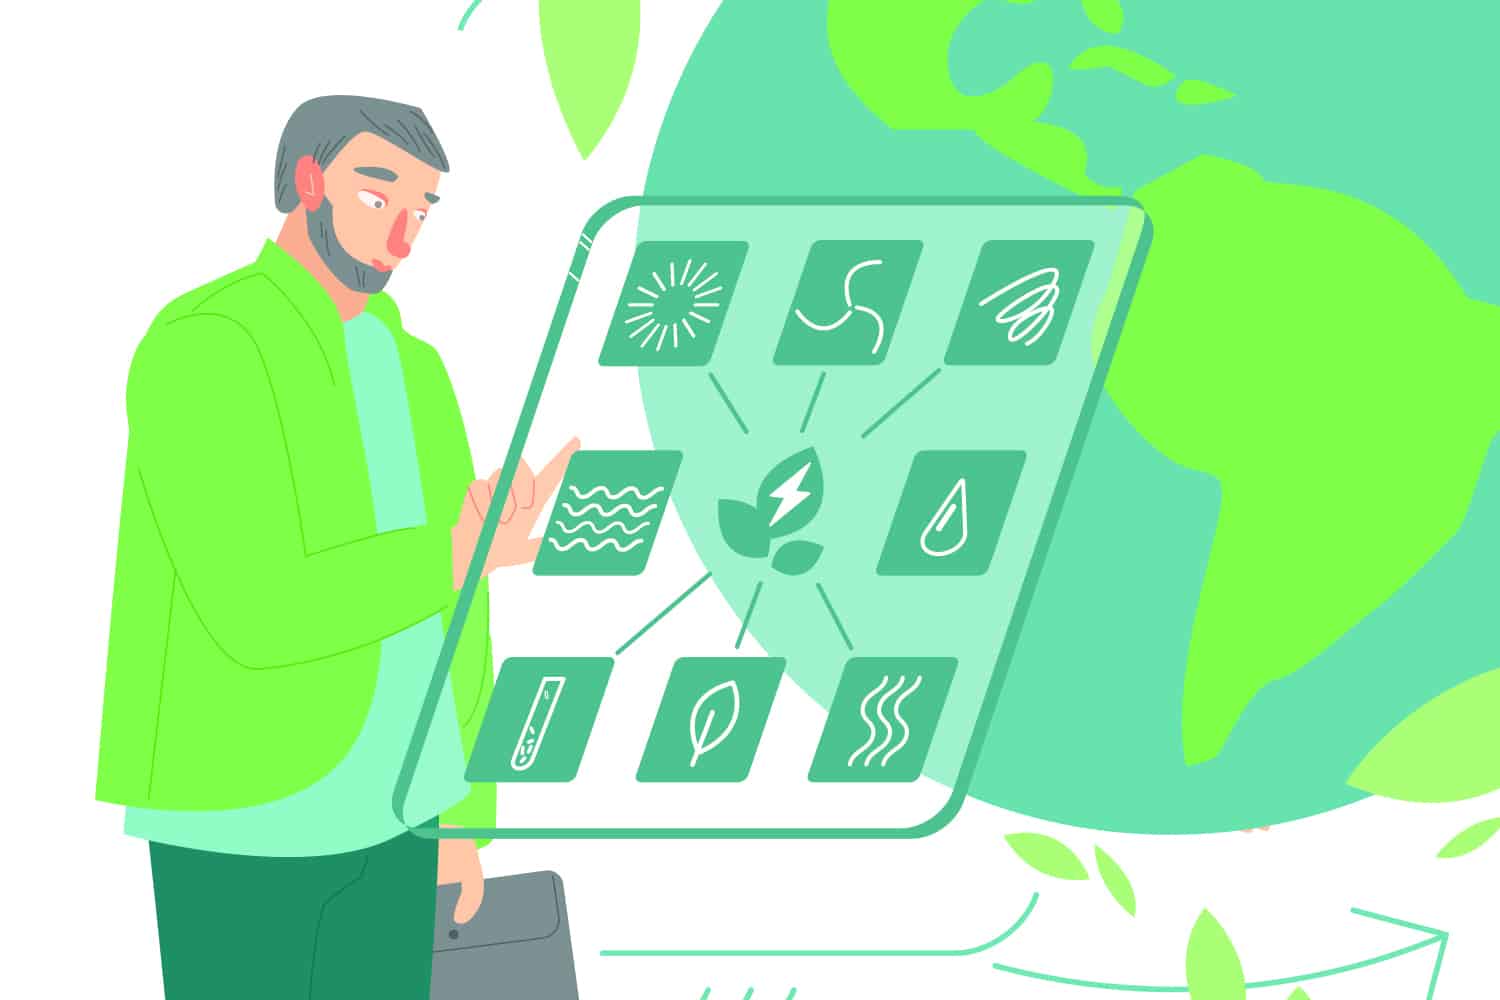 graphic of green planet and figure making green choices on keypad.